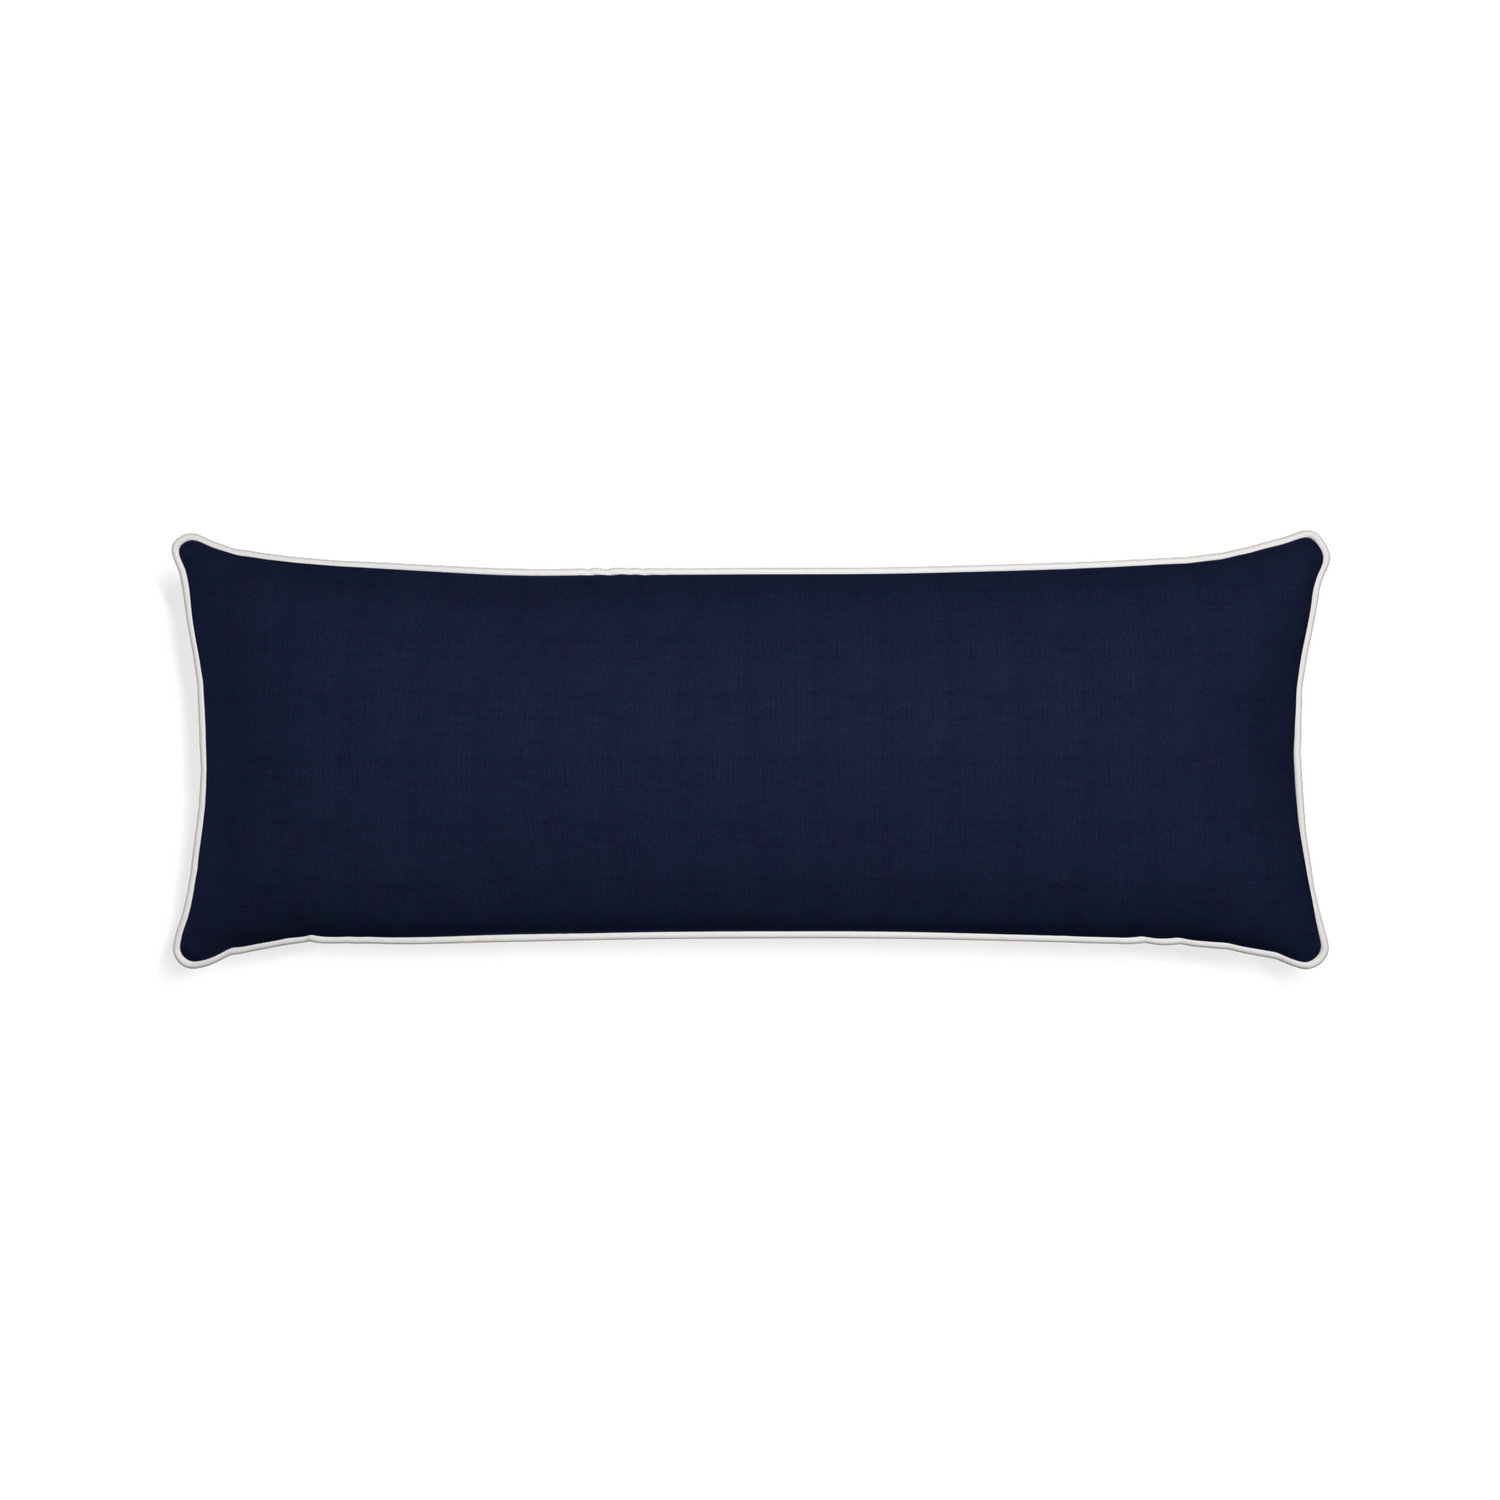 Xl-lumbar midnight custom navy bluepillow with snow piping on white background